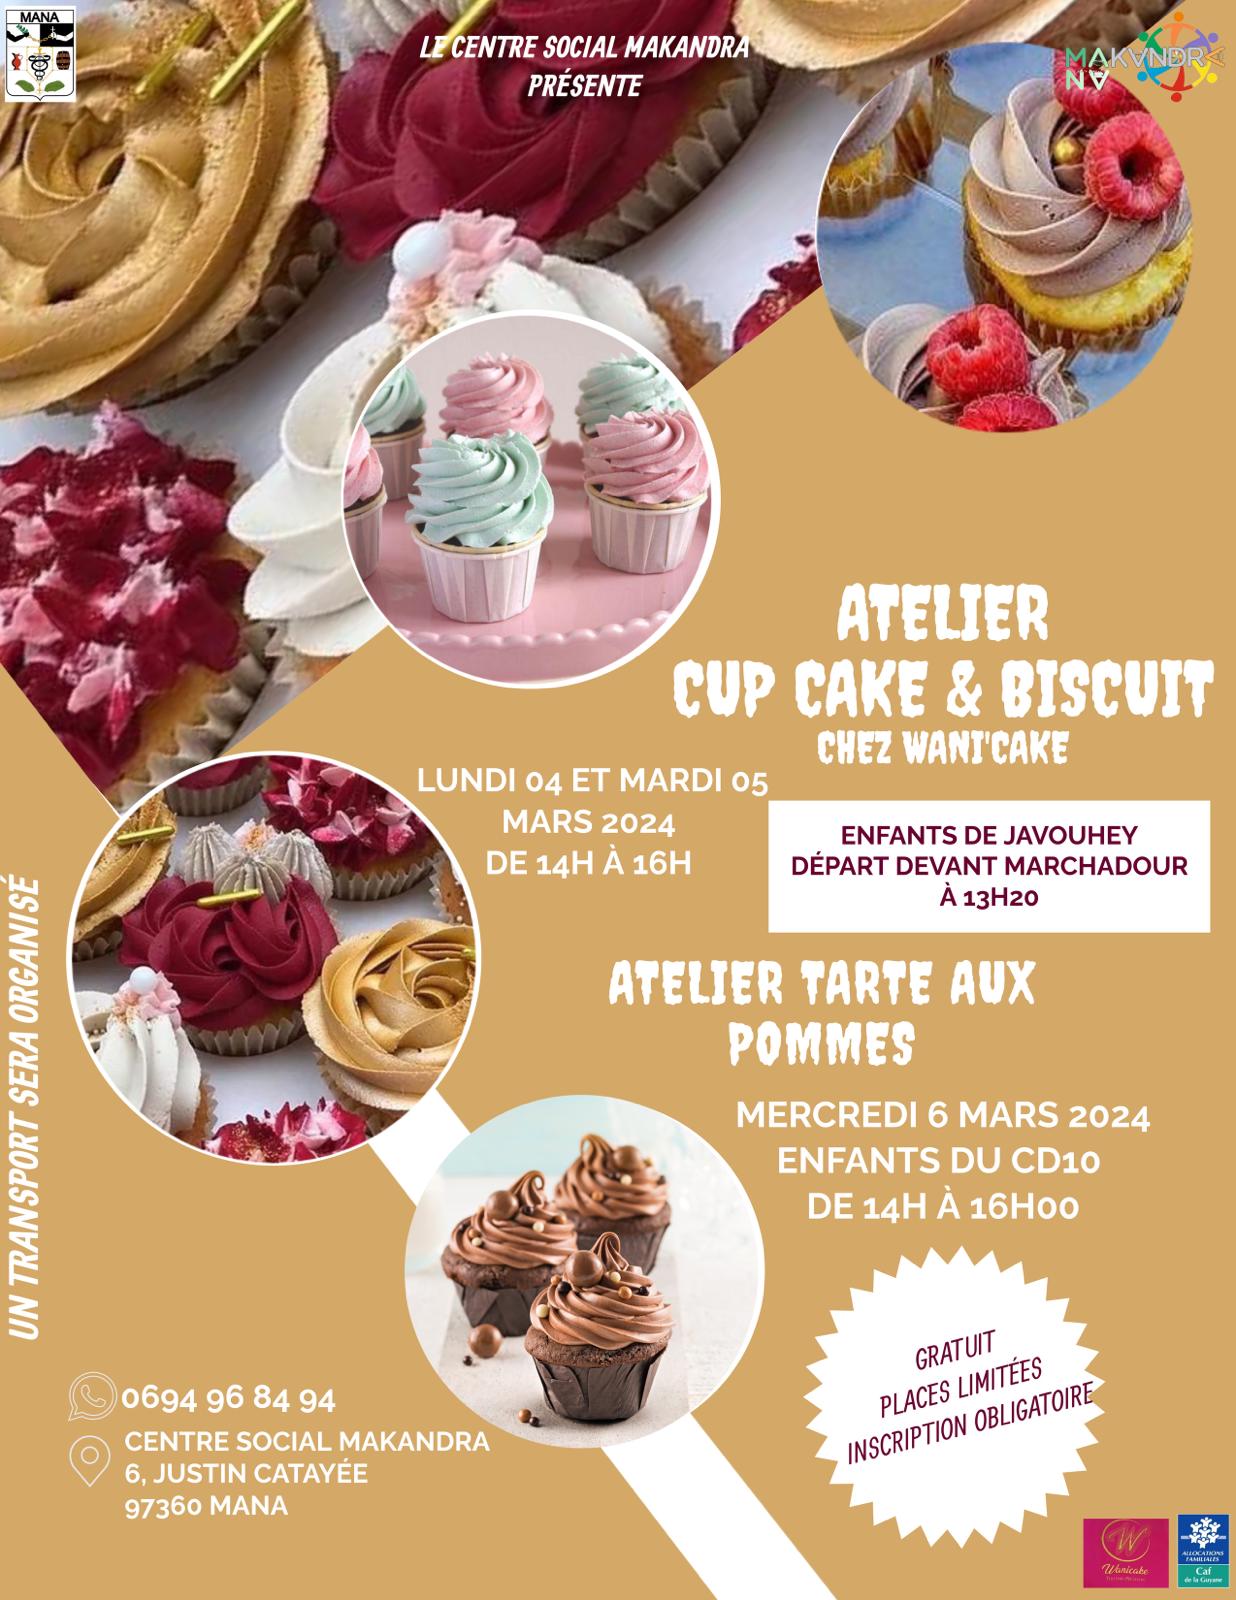 ATELIER CUP CAKE ET BISCUIT CHEZ WANI’CAKE